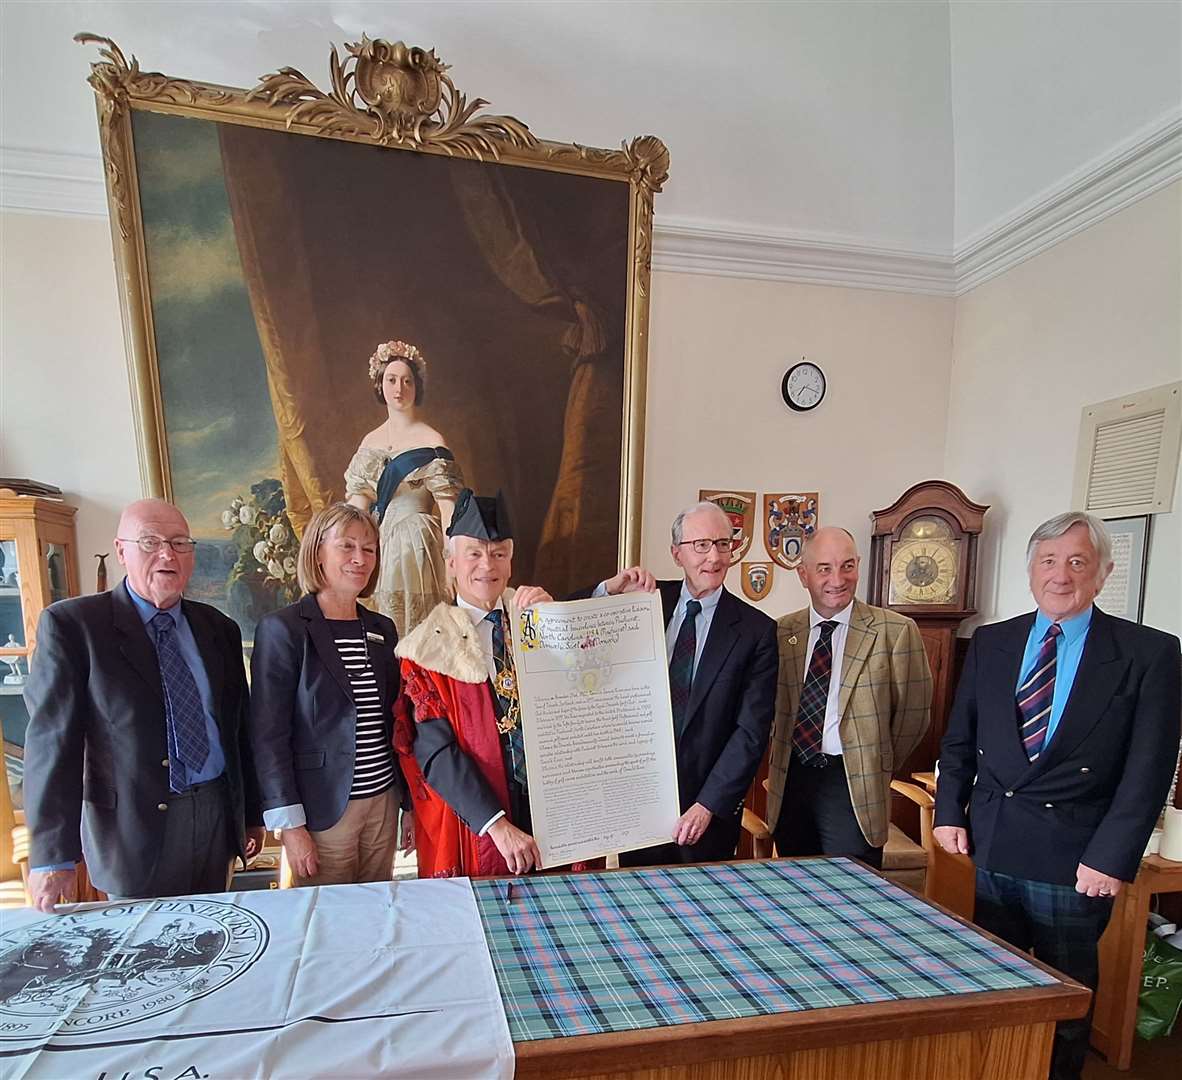 Provost Murray and Mayor Strickland hold up the agreement. From left, Cllr Jim McGillivray; Alison Davies, Dornoch Heritage SCIO trustee; Neil Hampton, general manager of Royal Dornoch Golf Course; and Dornoch Area Community Council member Jimmy Melville. The ceremony took place in the council chamber at Dornoch.